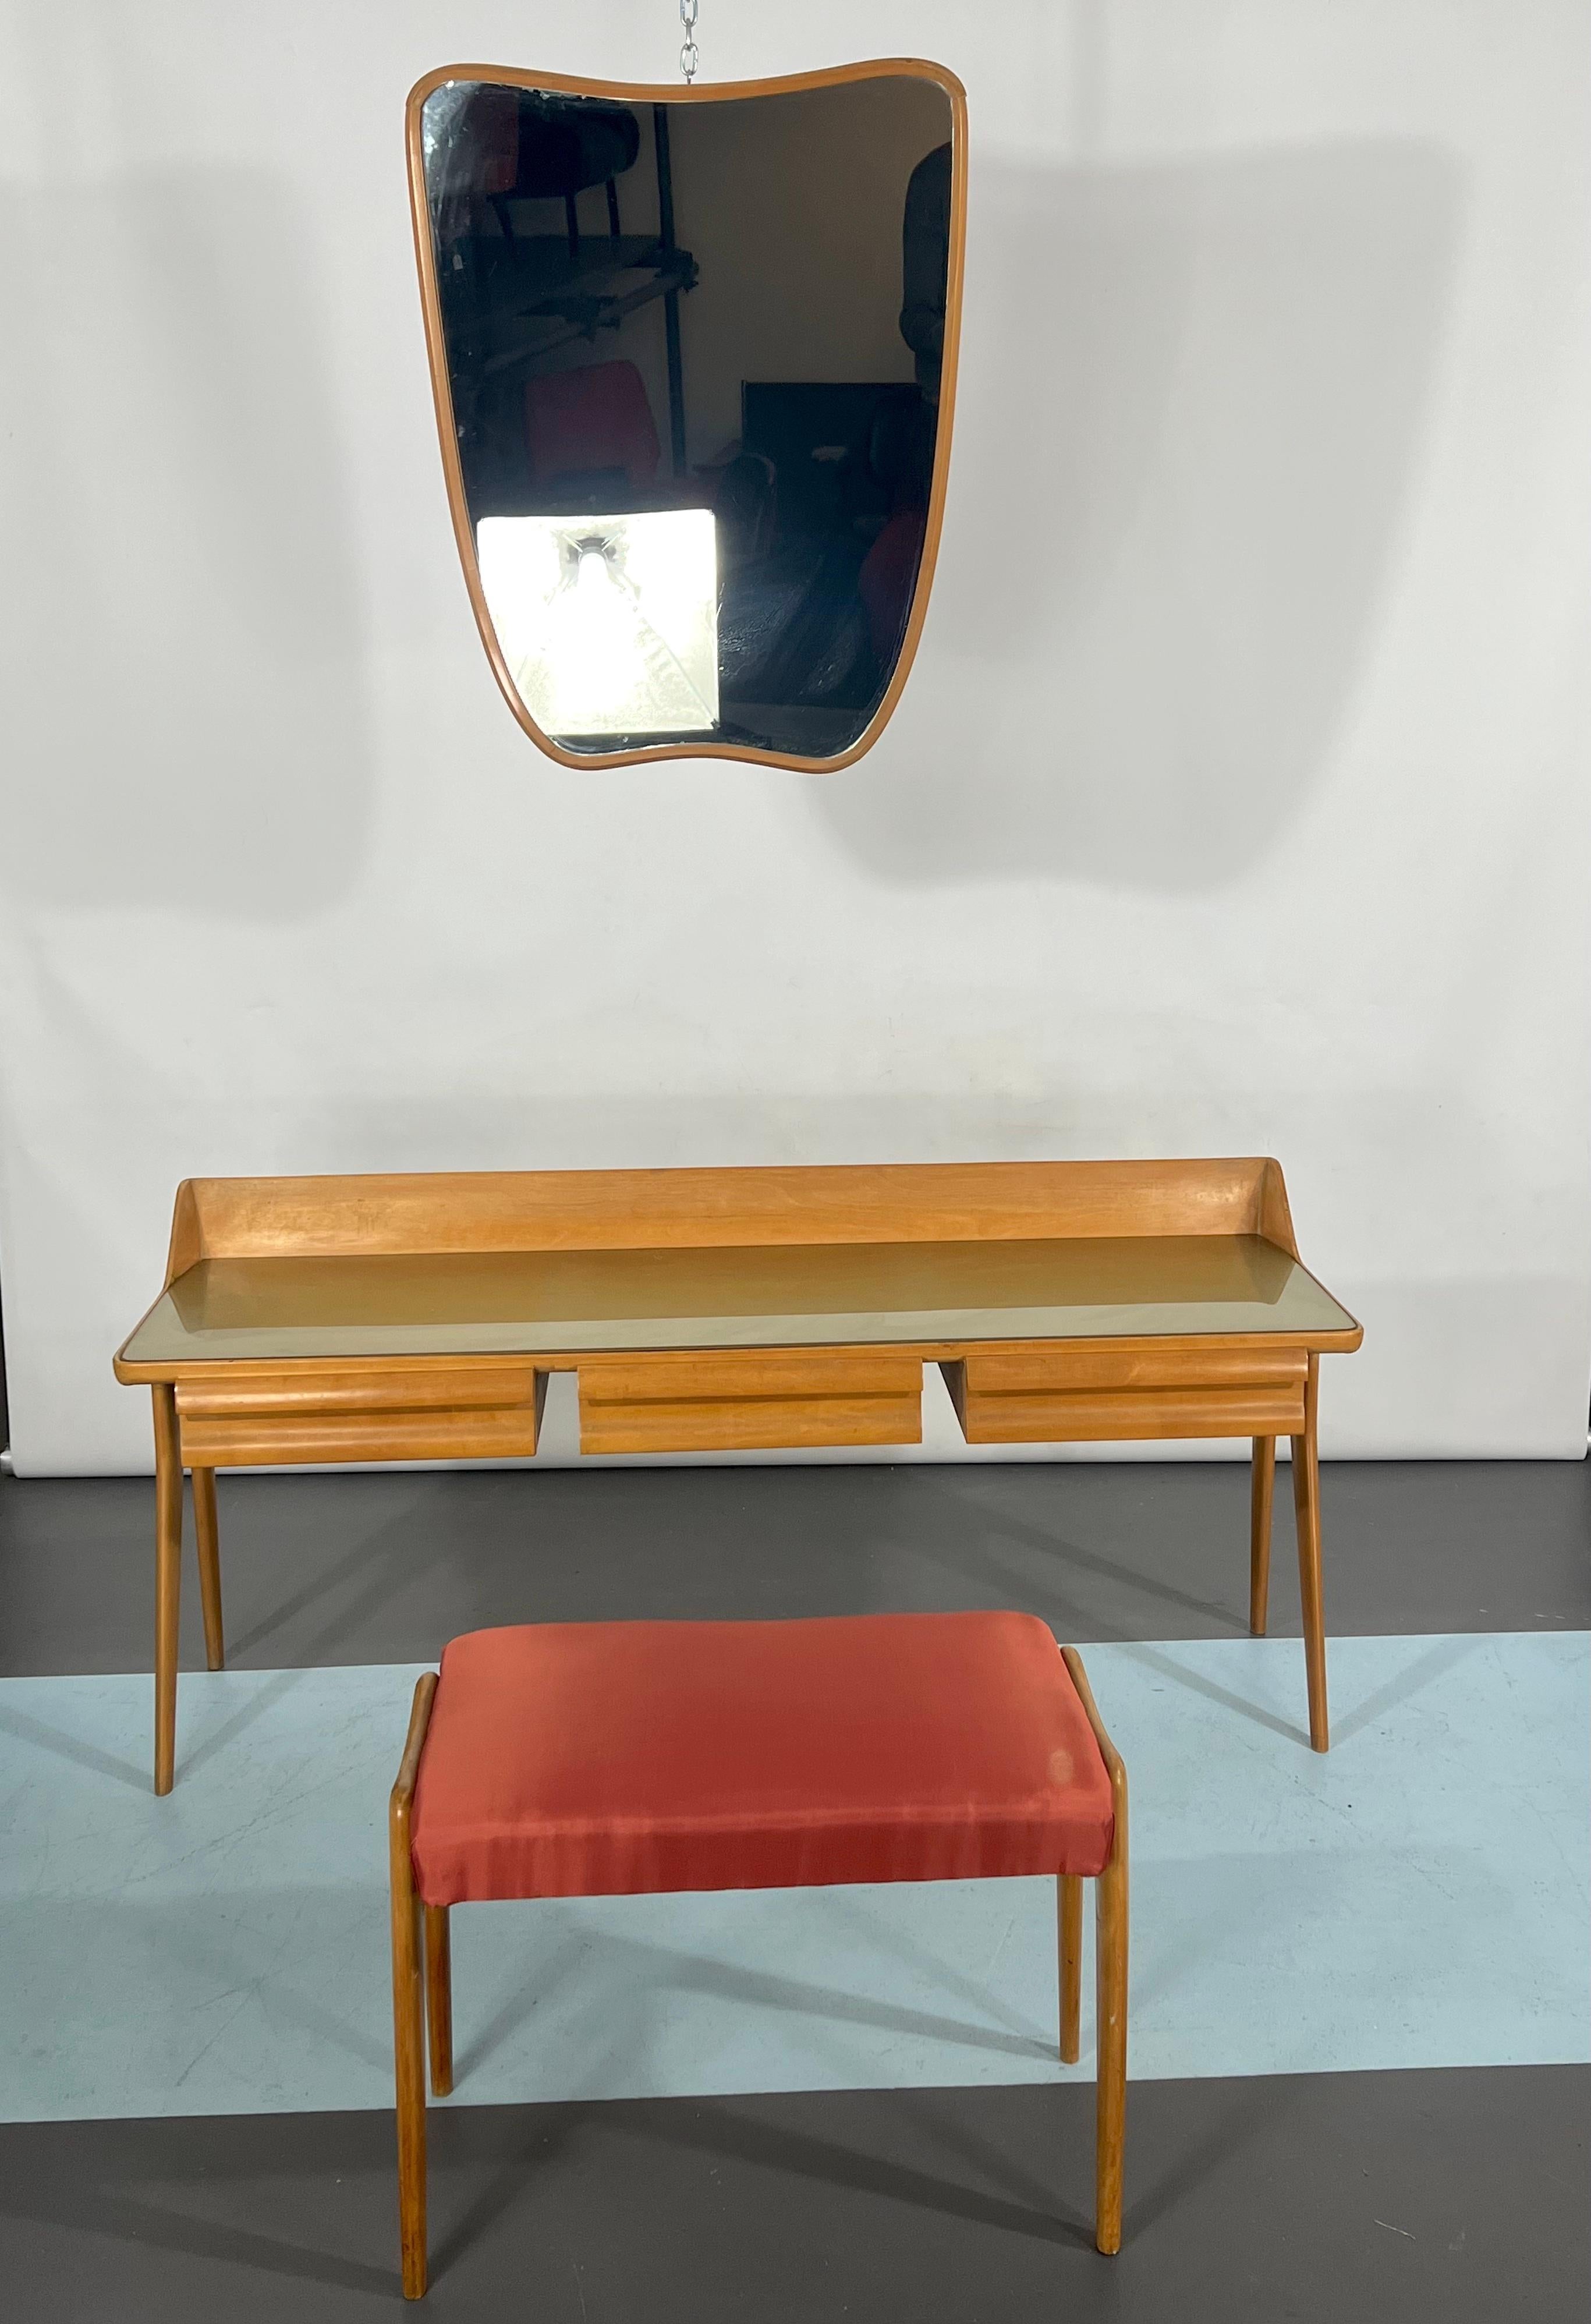 Great vintage condition for this vanity set composed of dressing table, stool and mirror. It is made from wood in bright finish. Reminiscent of Ico Parisi style and produced in Italy during the 1950s.